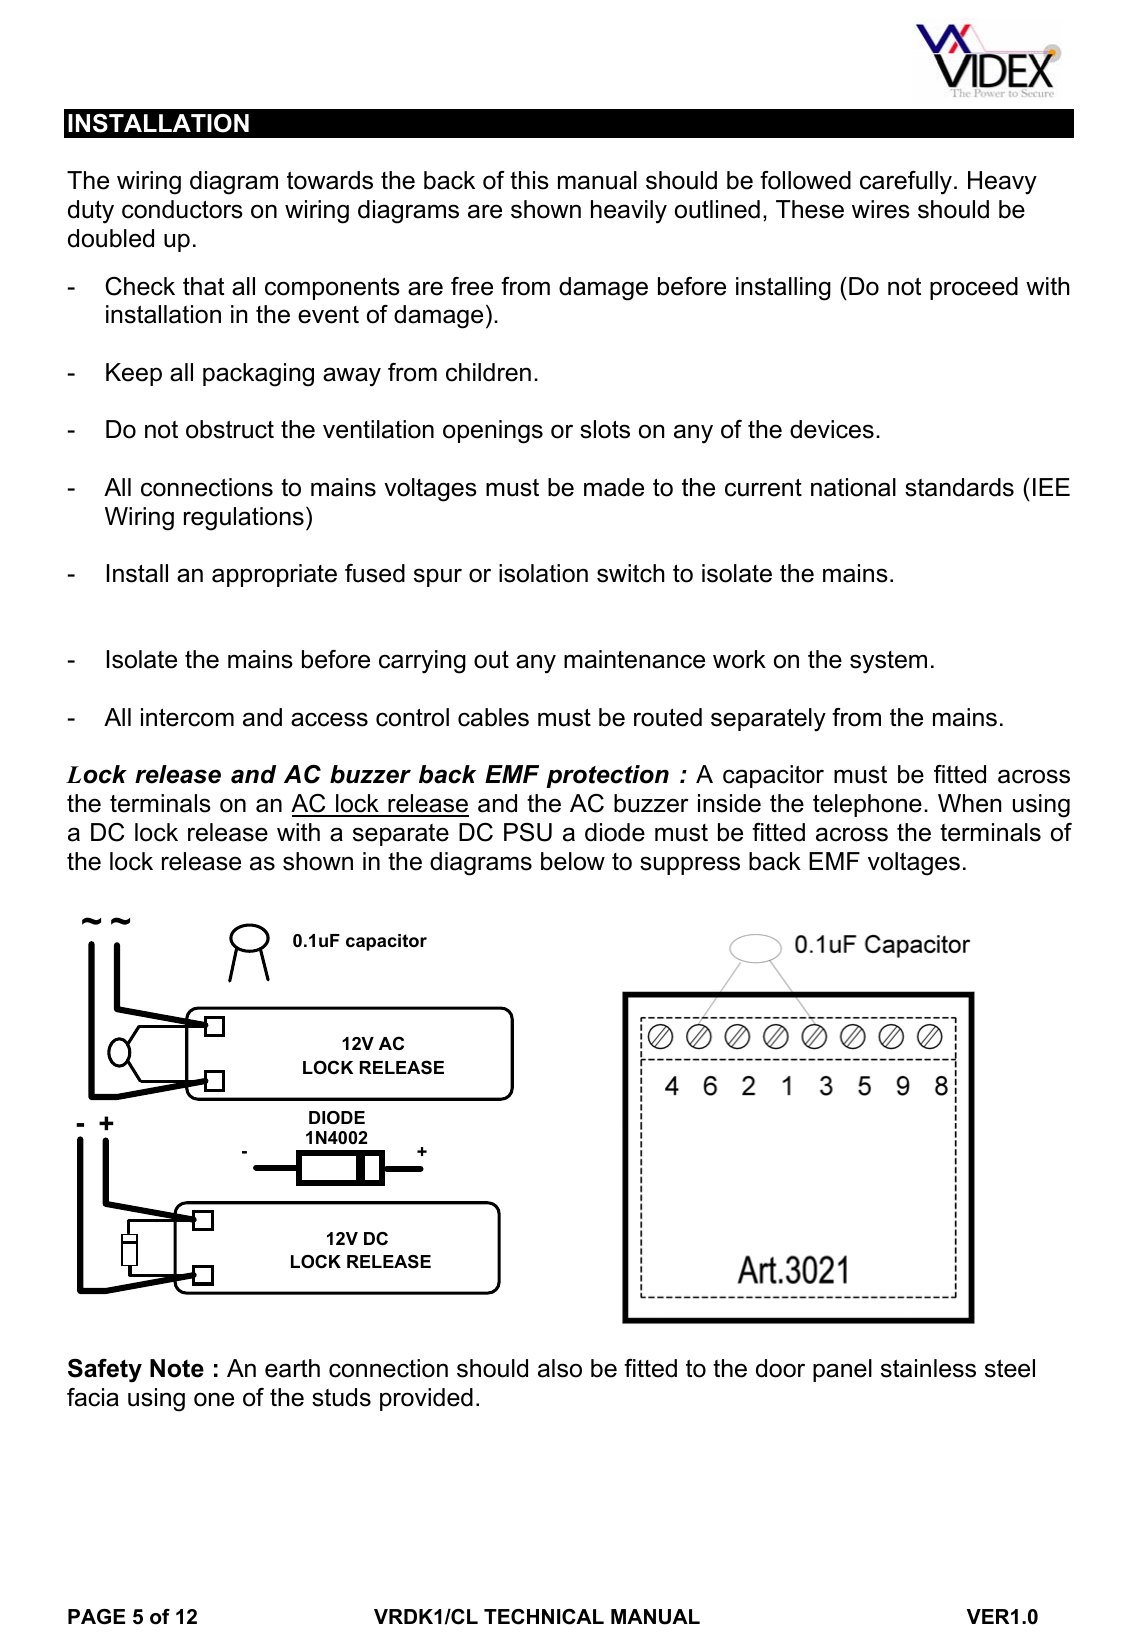 Page 5 of 12 - VRDK1CLManual Videx-VRDK1CL-Manual-with-codelock